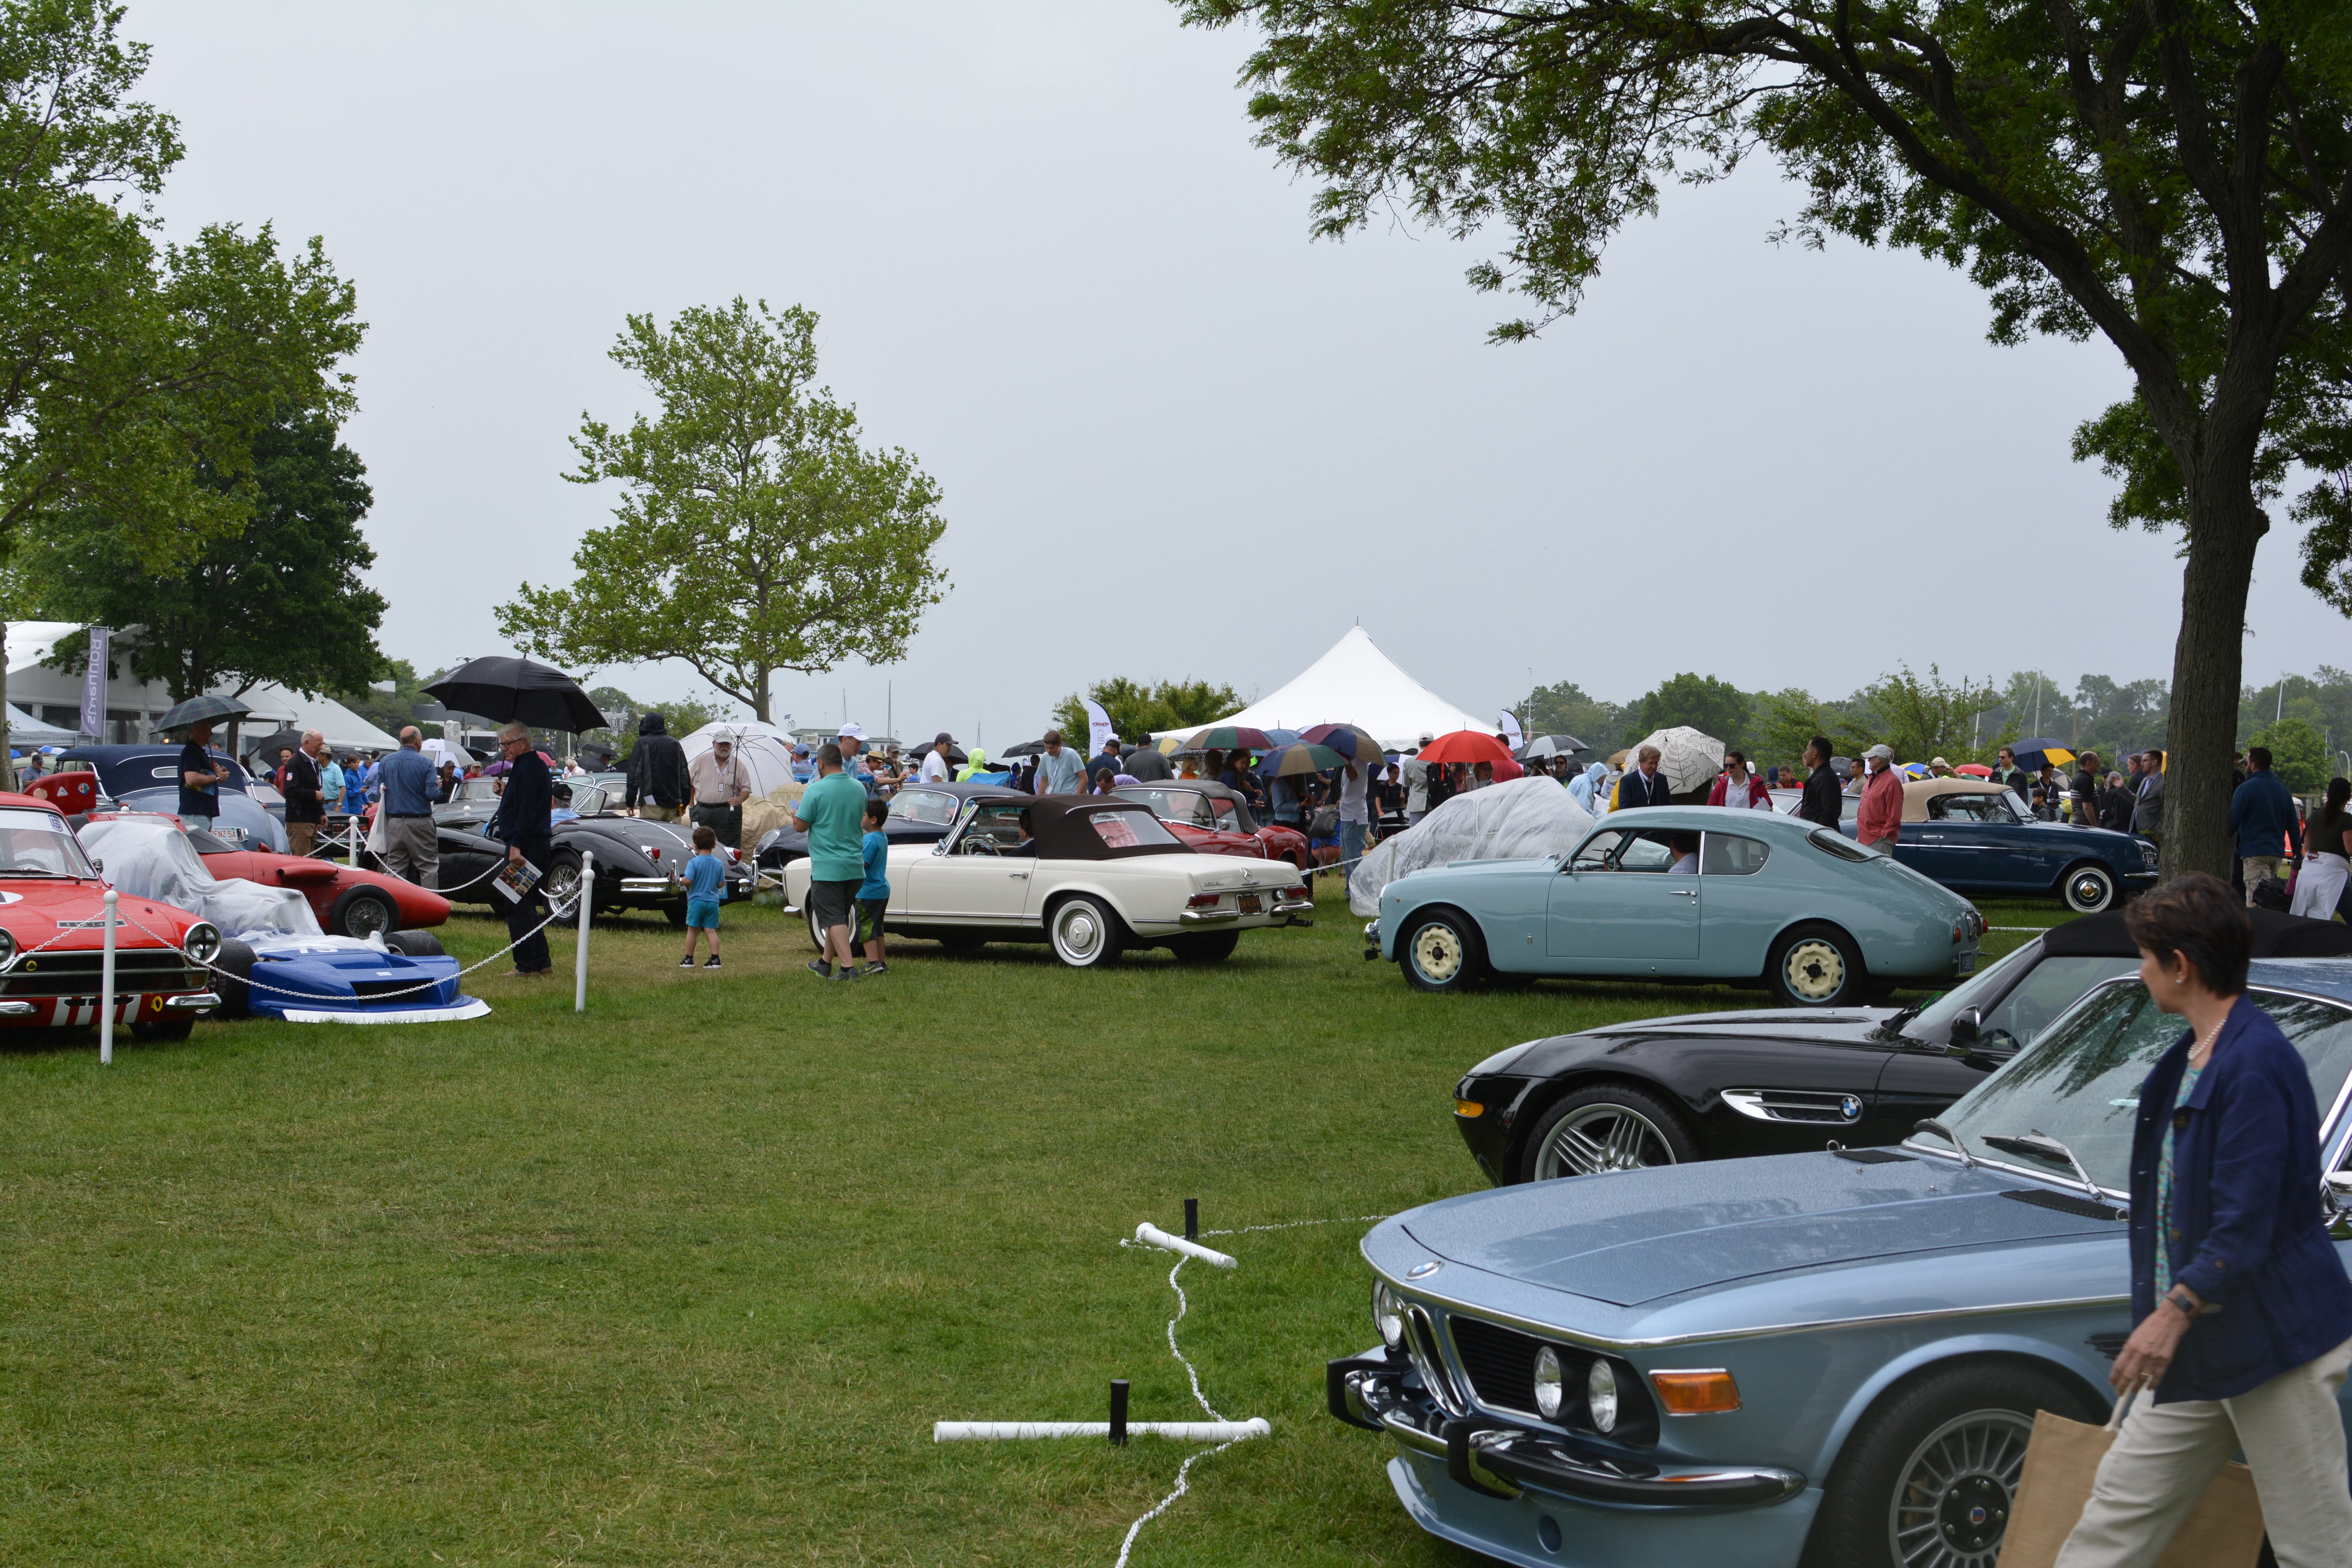 The Greenwich Concours D’elegance hosted its 22nd annual car show on June 3-4, 2017 in Roger Sherman Baldwin Park. Photo Brendan Boyd